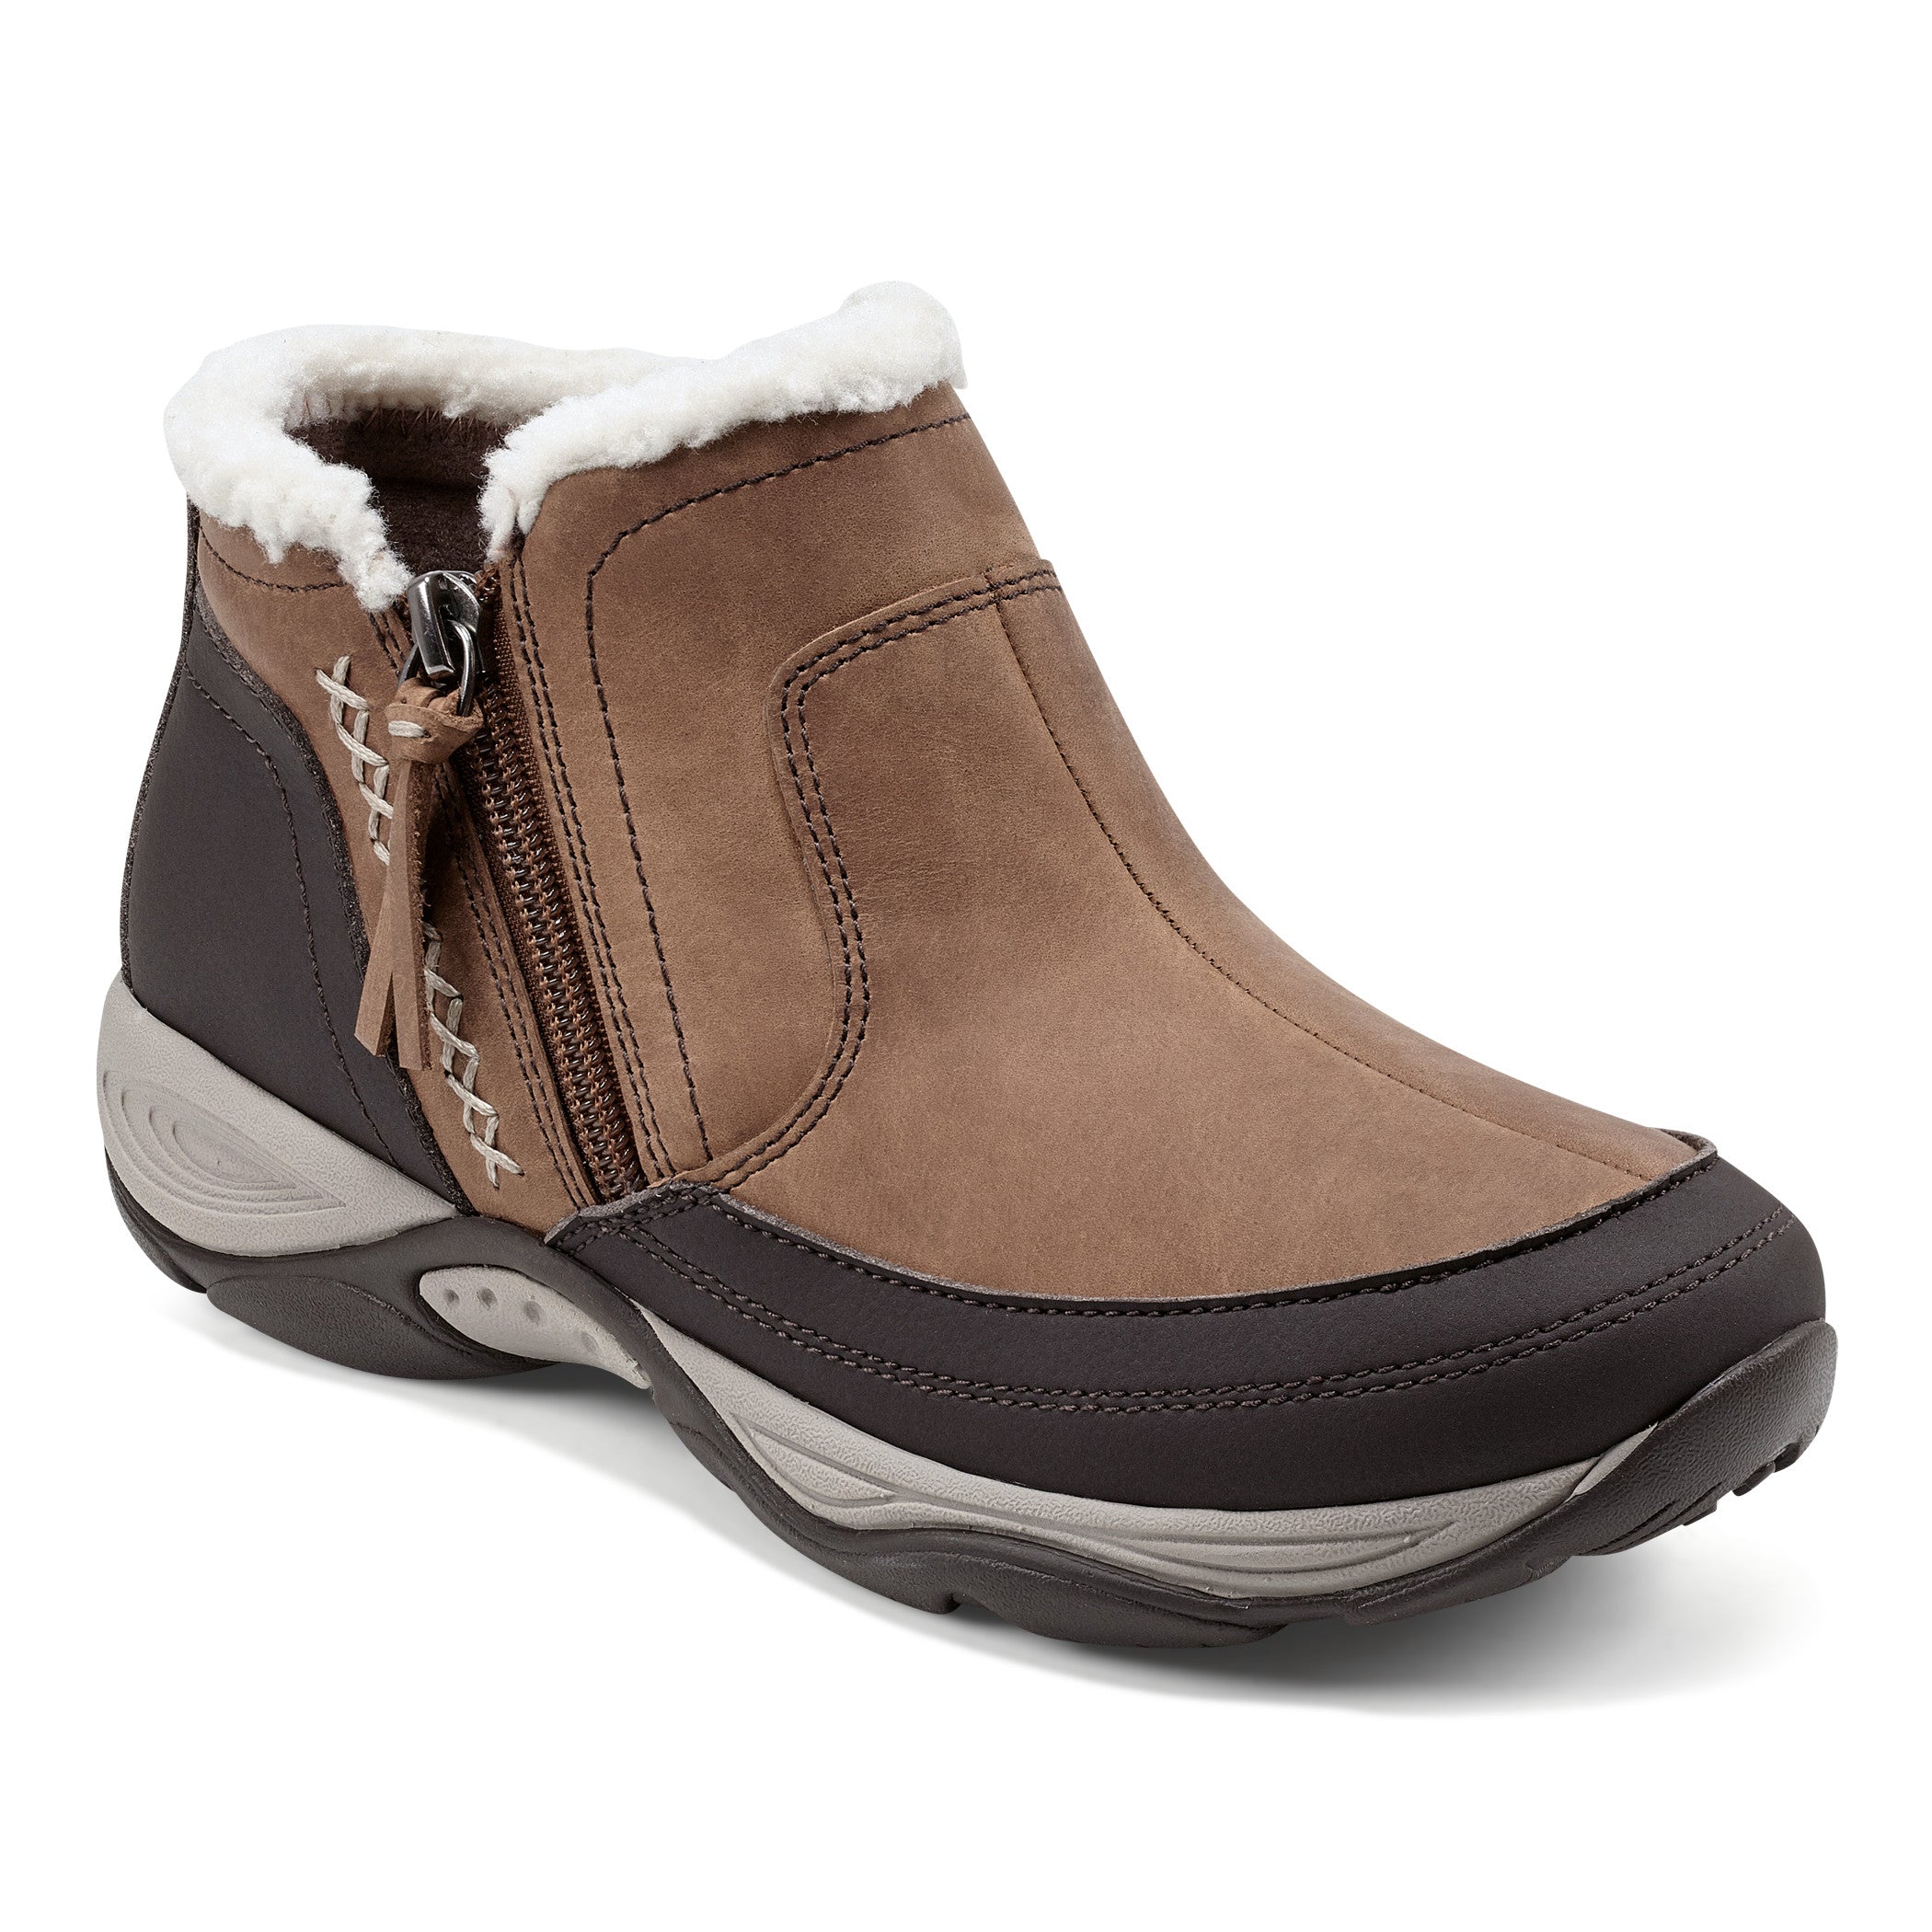 Epic Cold Weather Booties